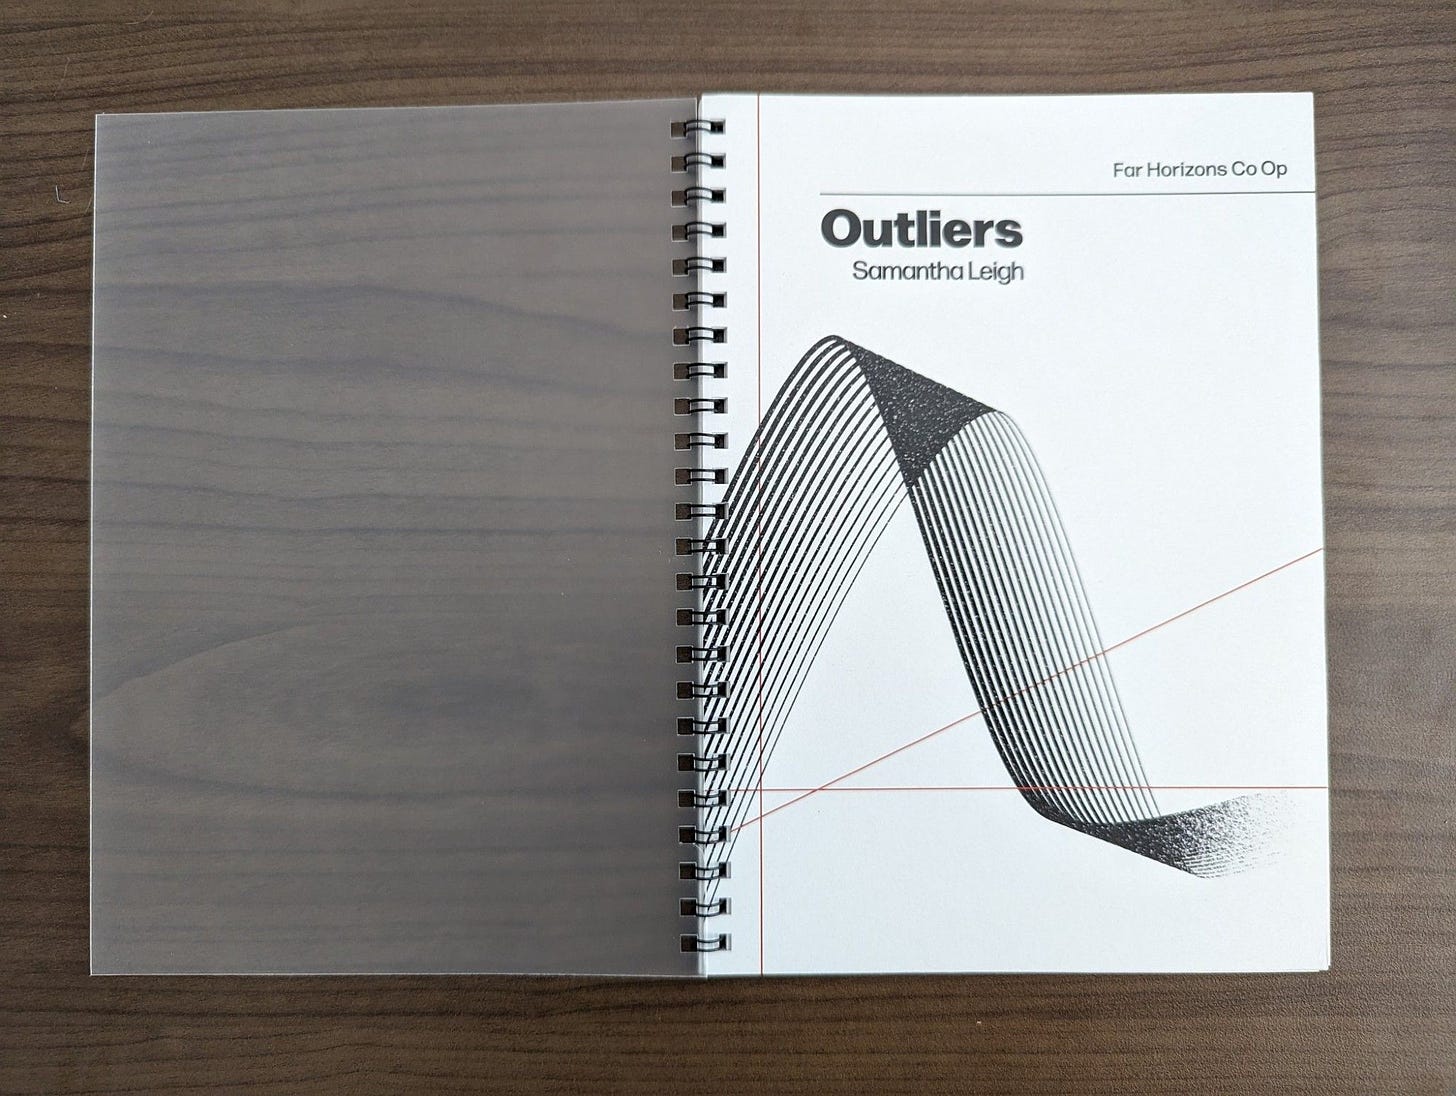 A printed copy of Outliers, which is spiral-bound with a frosted cover